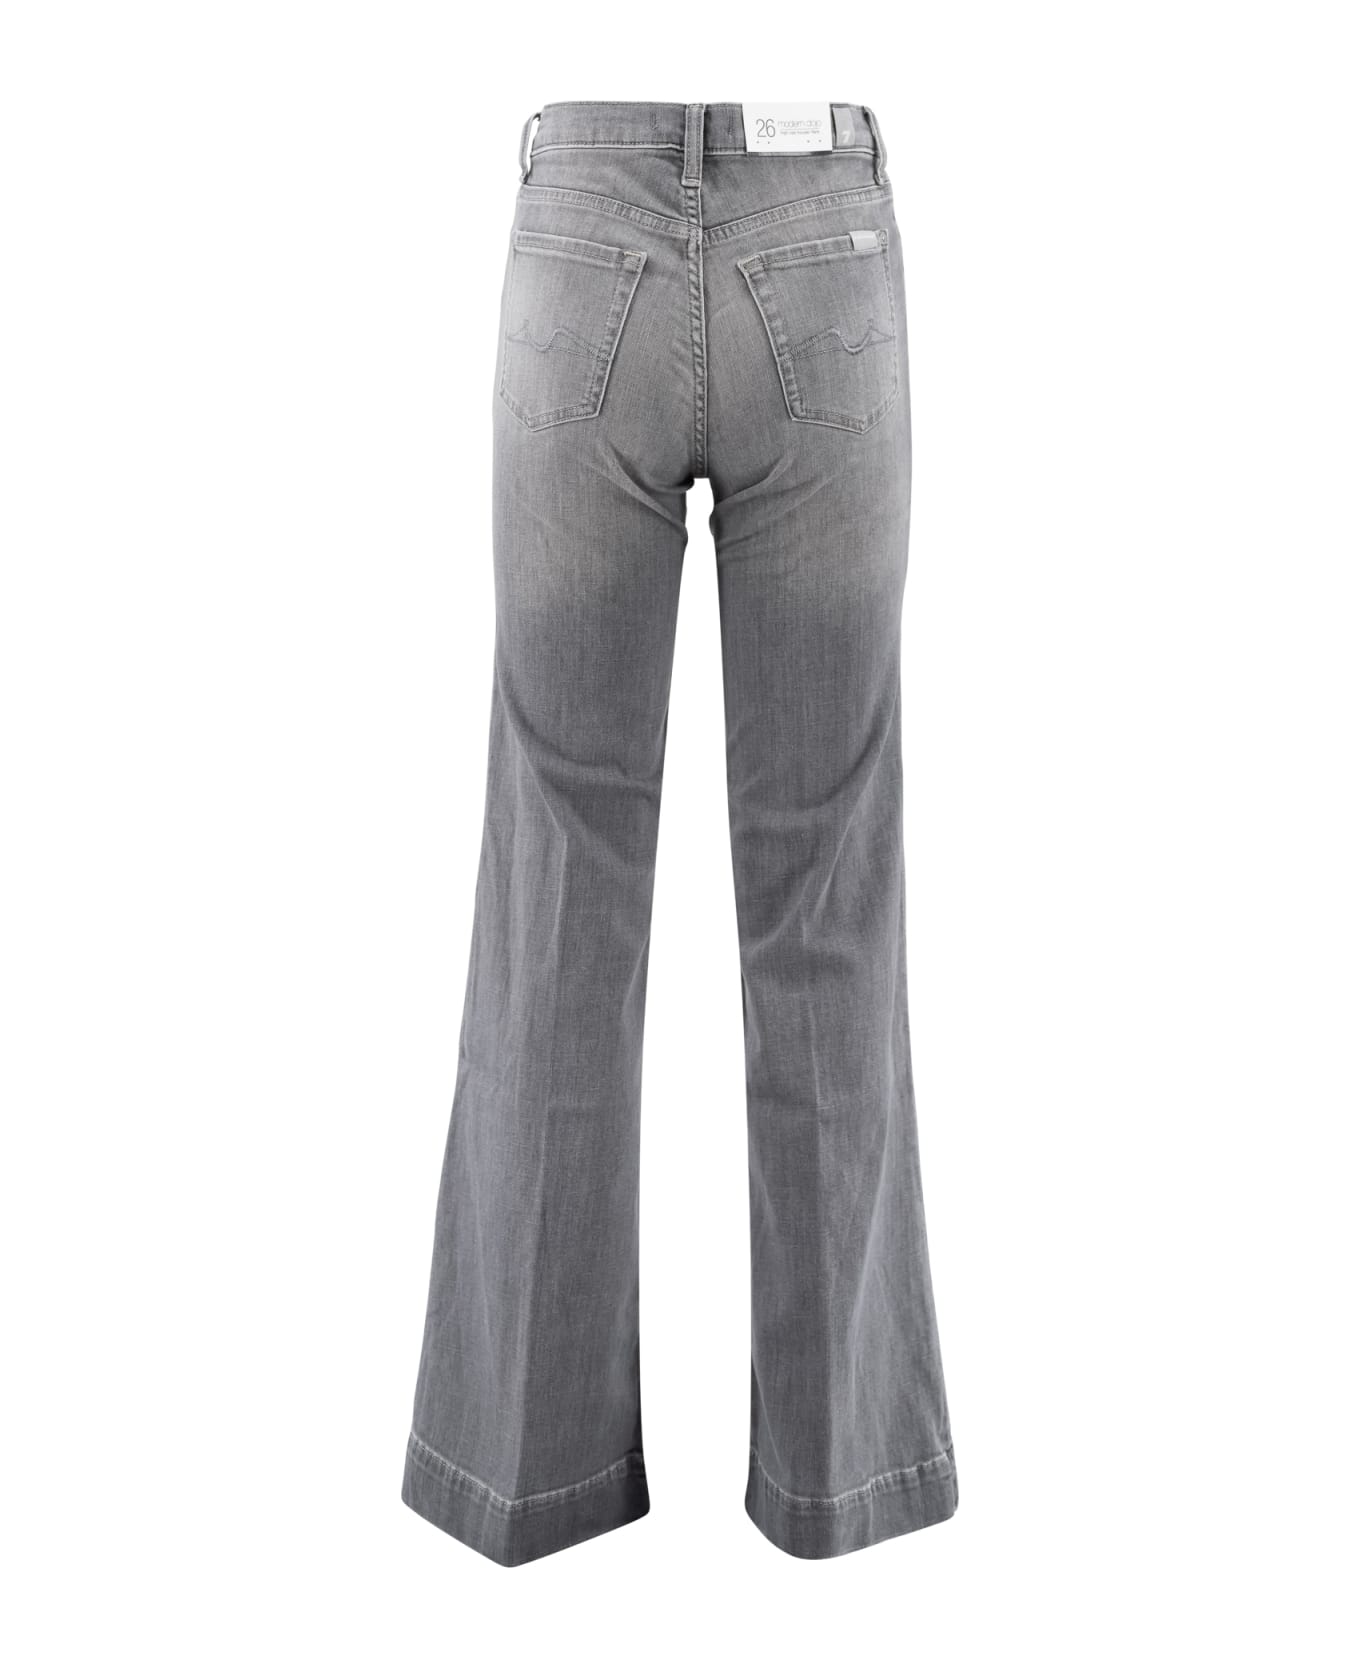 7 For All Mankind Modern Dojo High-rise Flared Jeans - Grey